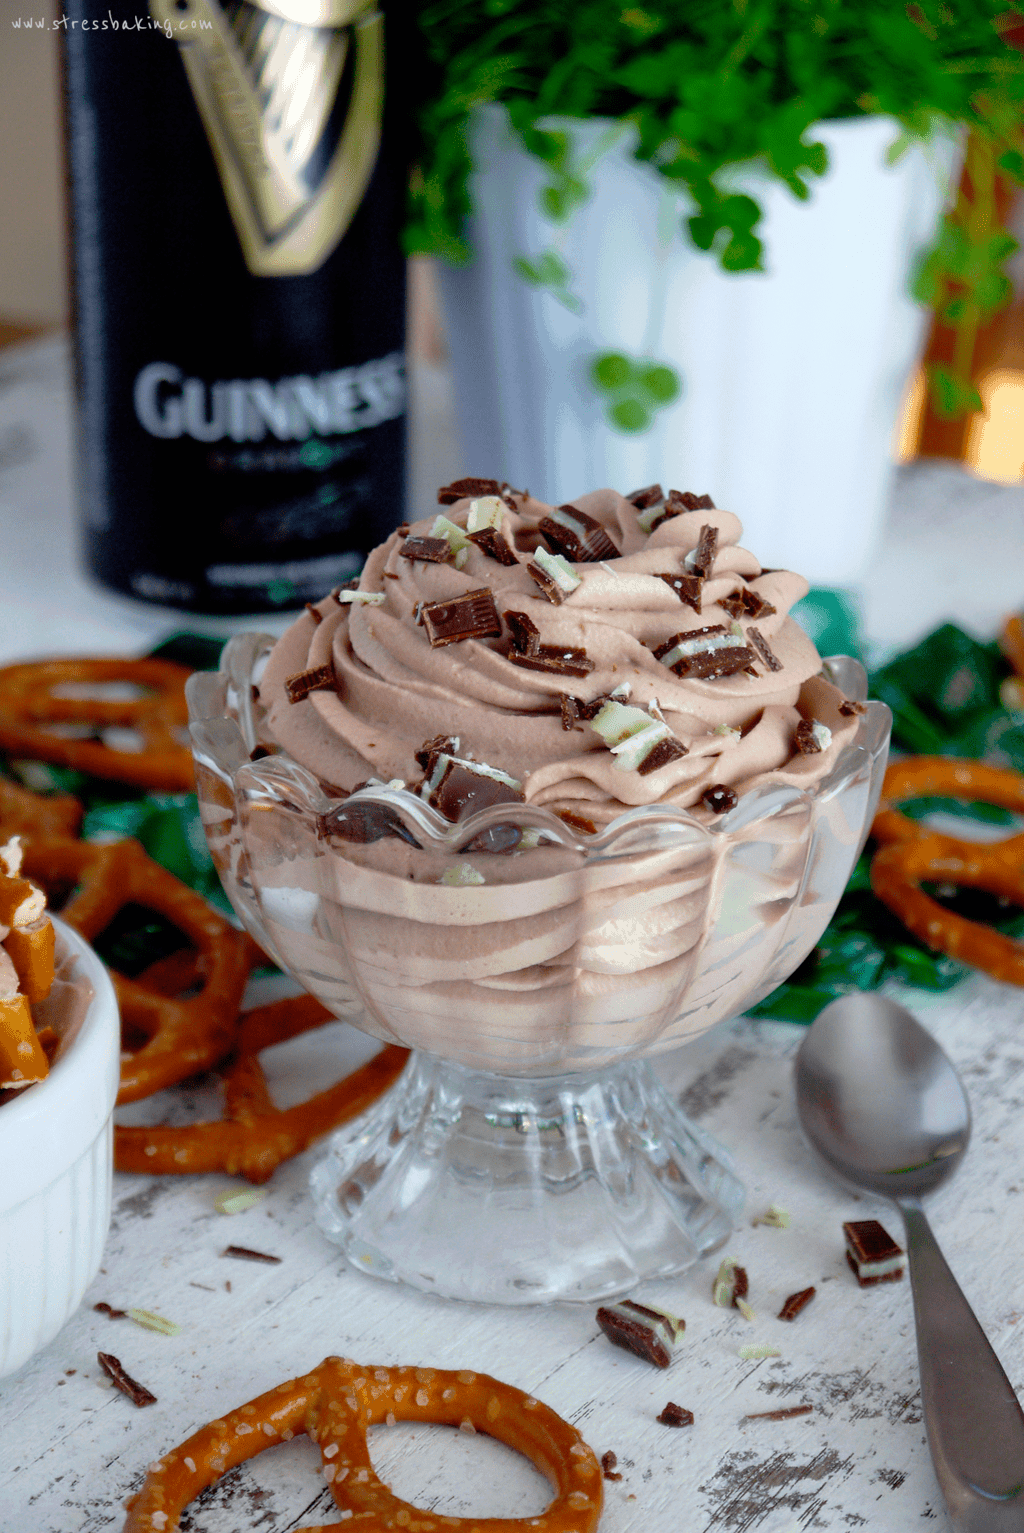 Dessert glass filled with chocolate Guinness whipped cream and topped with chopped Andes mints